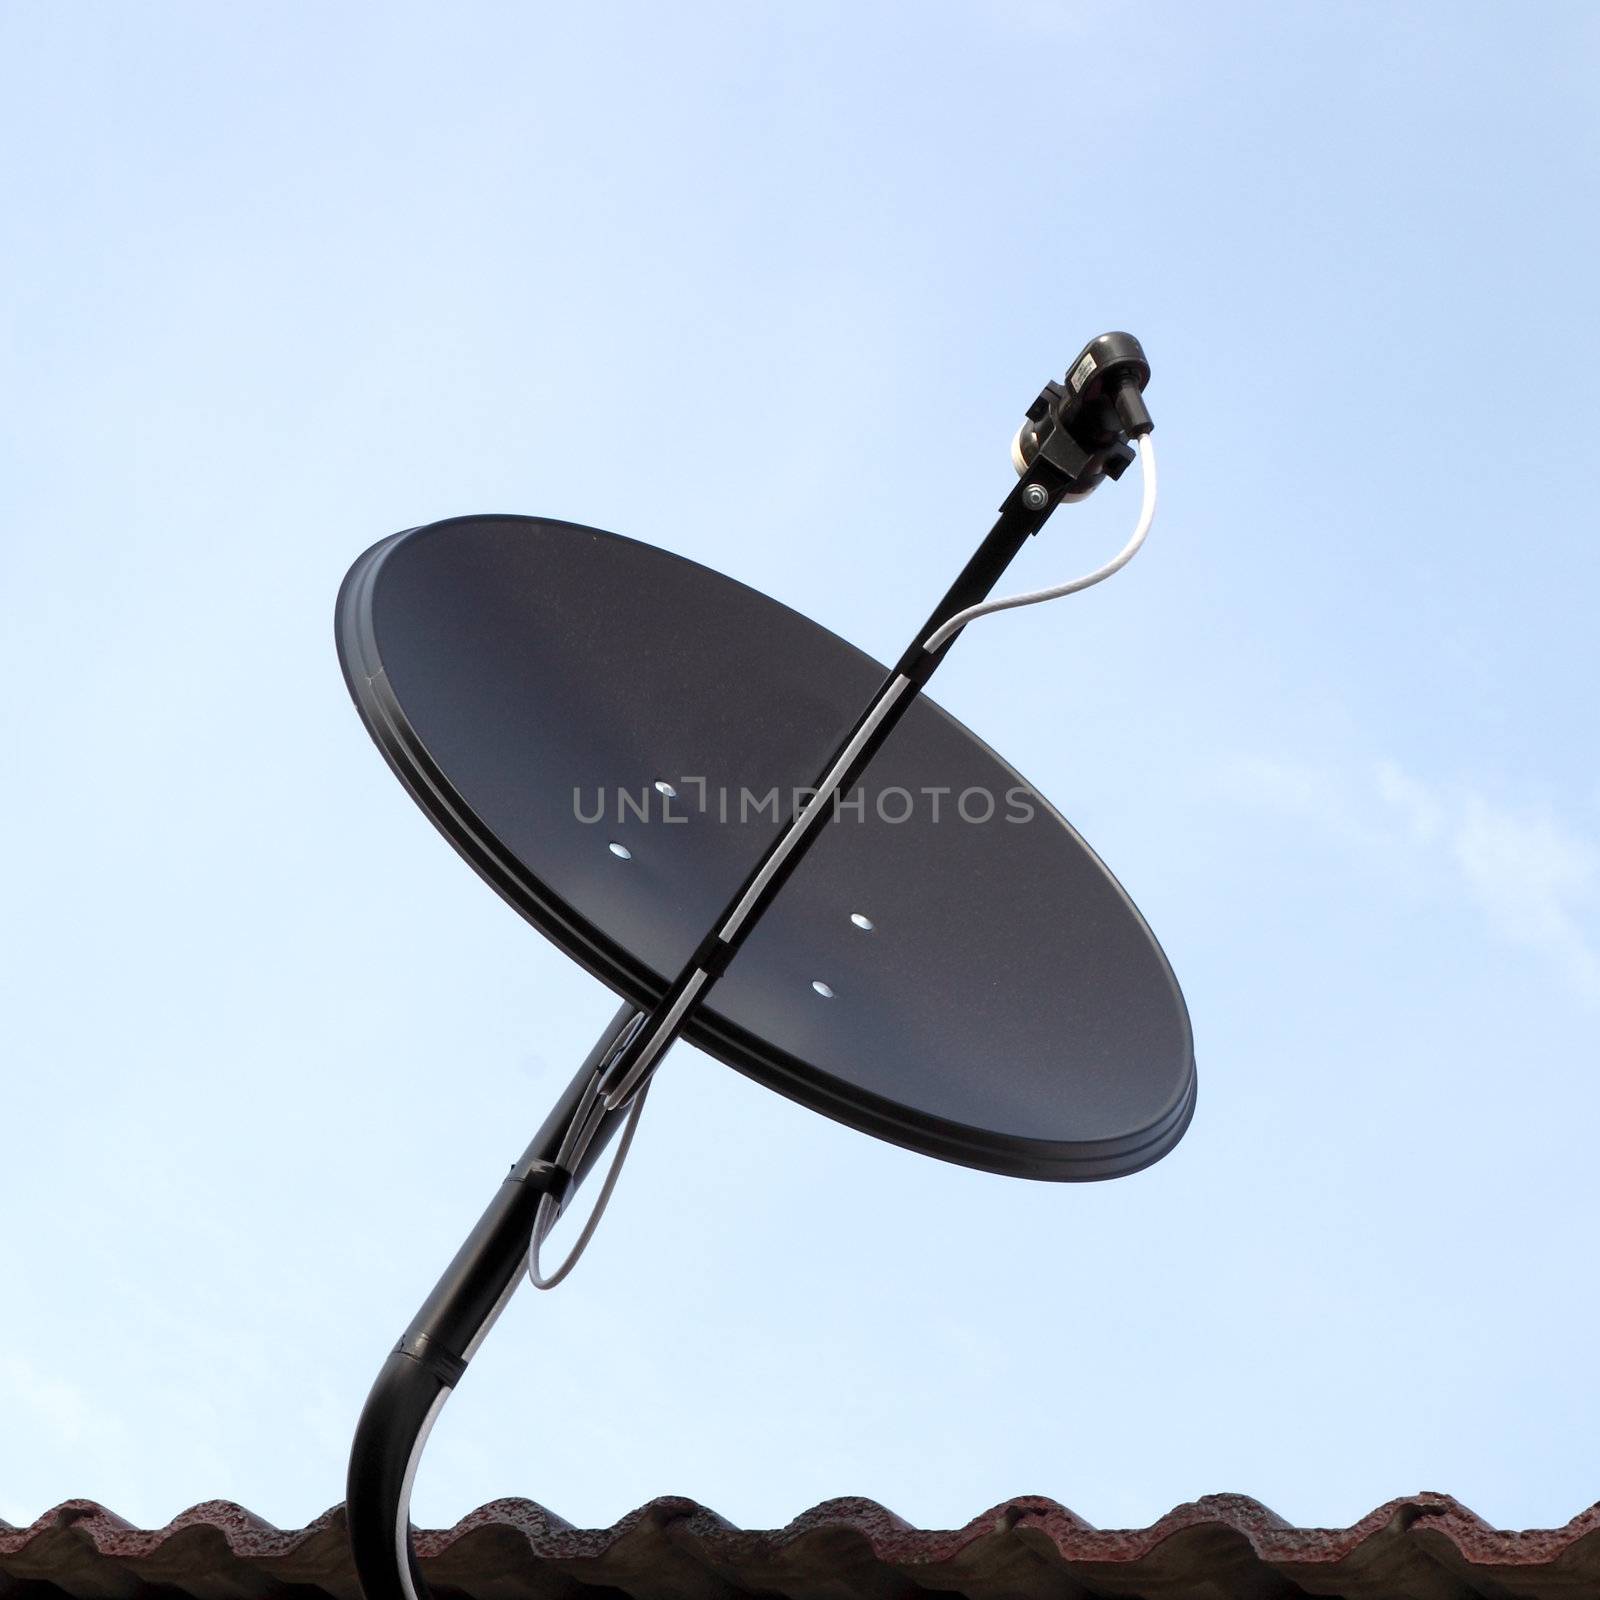 Satellite dish on the roof